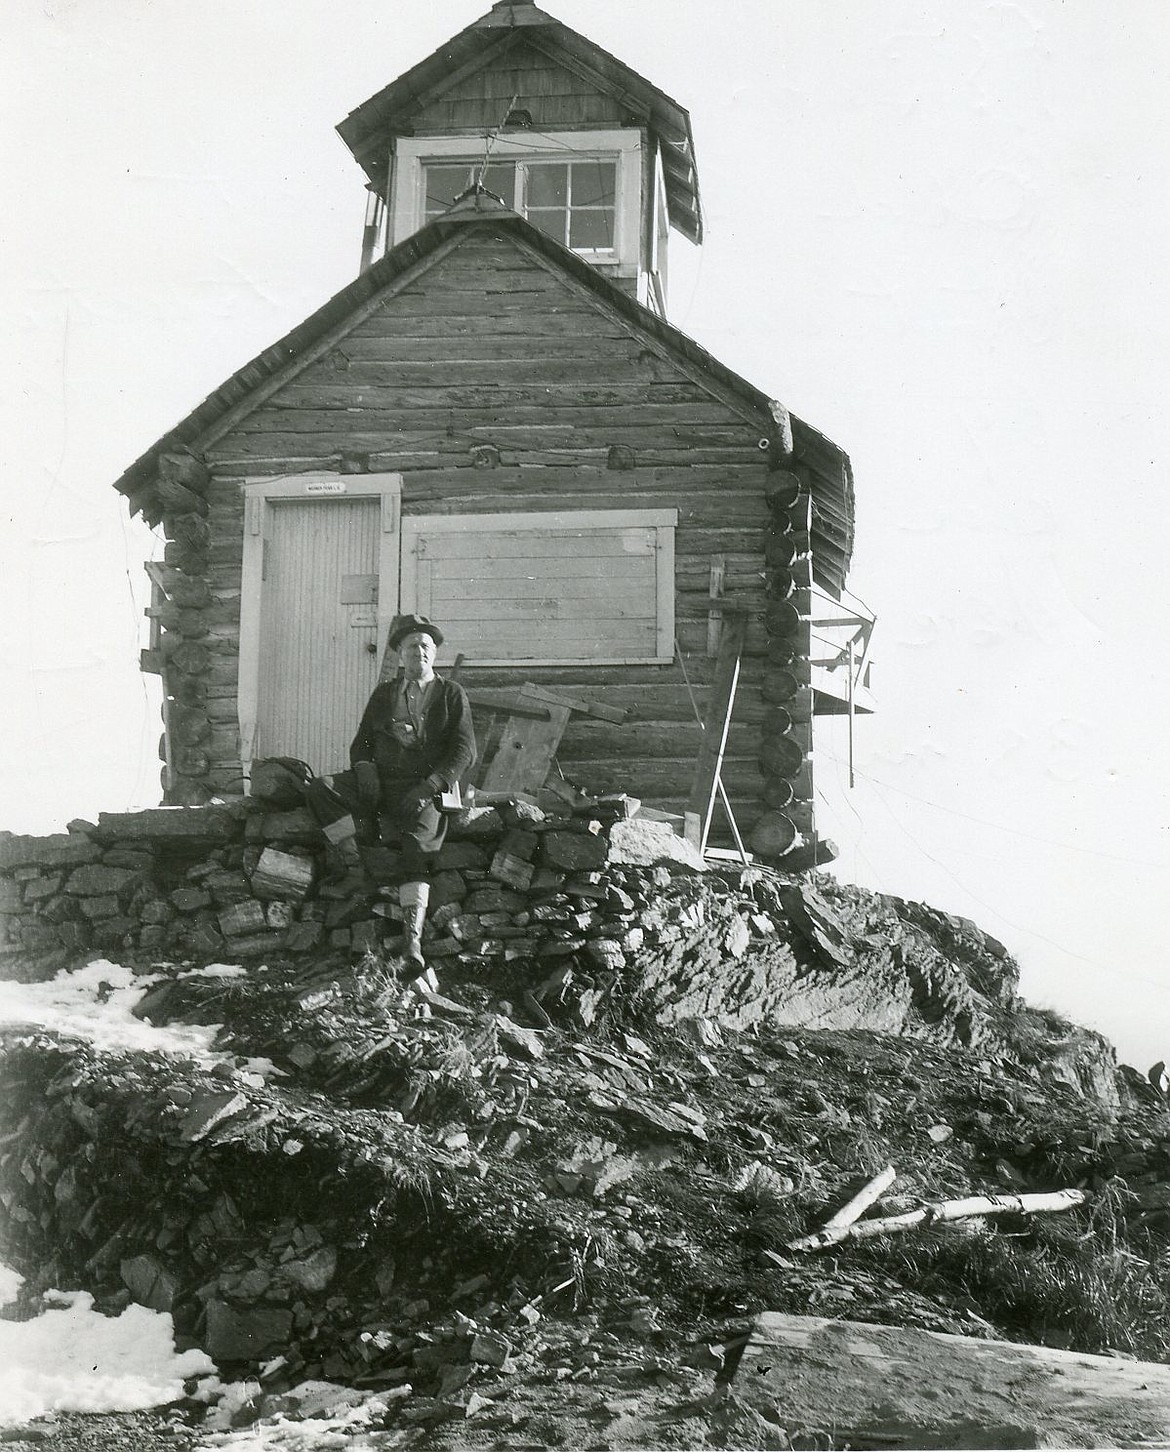 A.E. Boorman rests outside the old Werner Peak Lookout 38 miles north of Kalispell in October 1941. (M.E. Boorman photo)